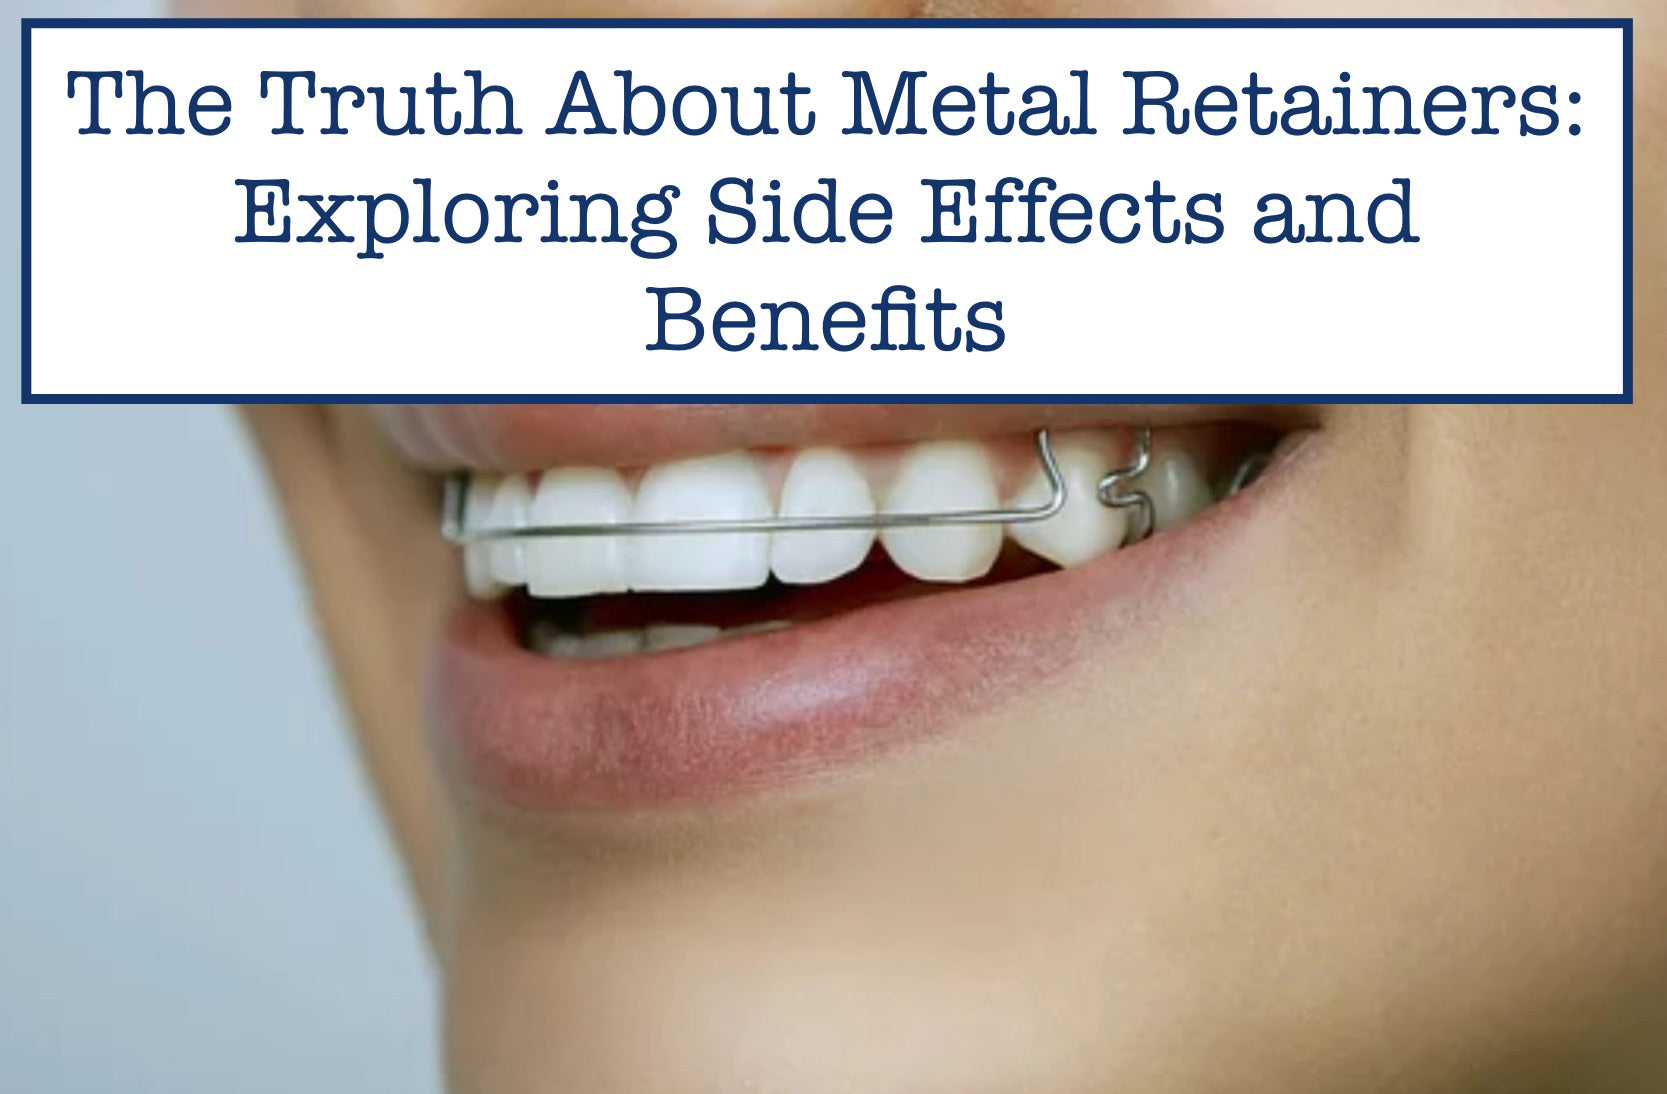 The Pros and Cons of Metal Retainers: What You Need to Know